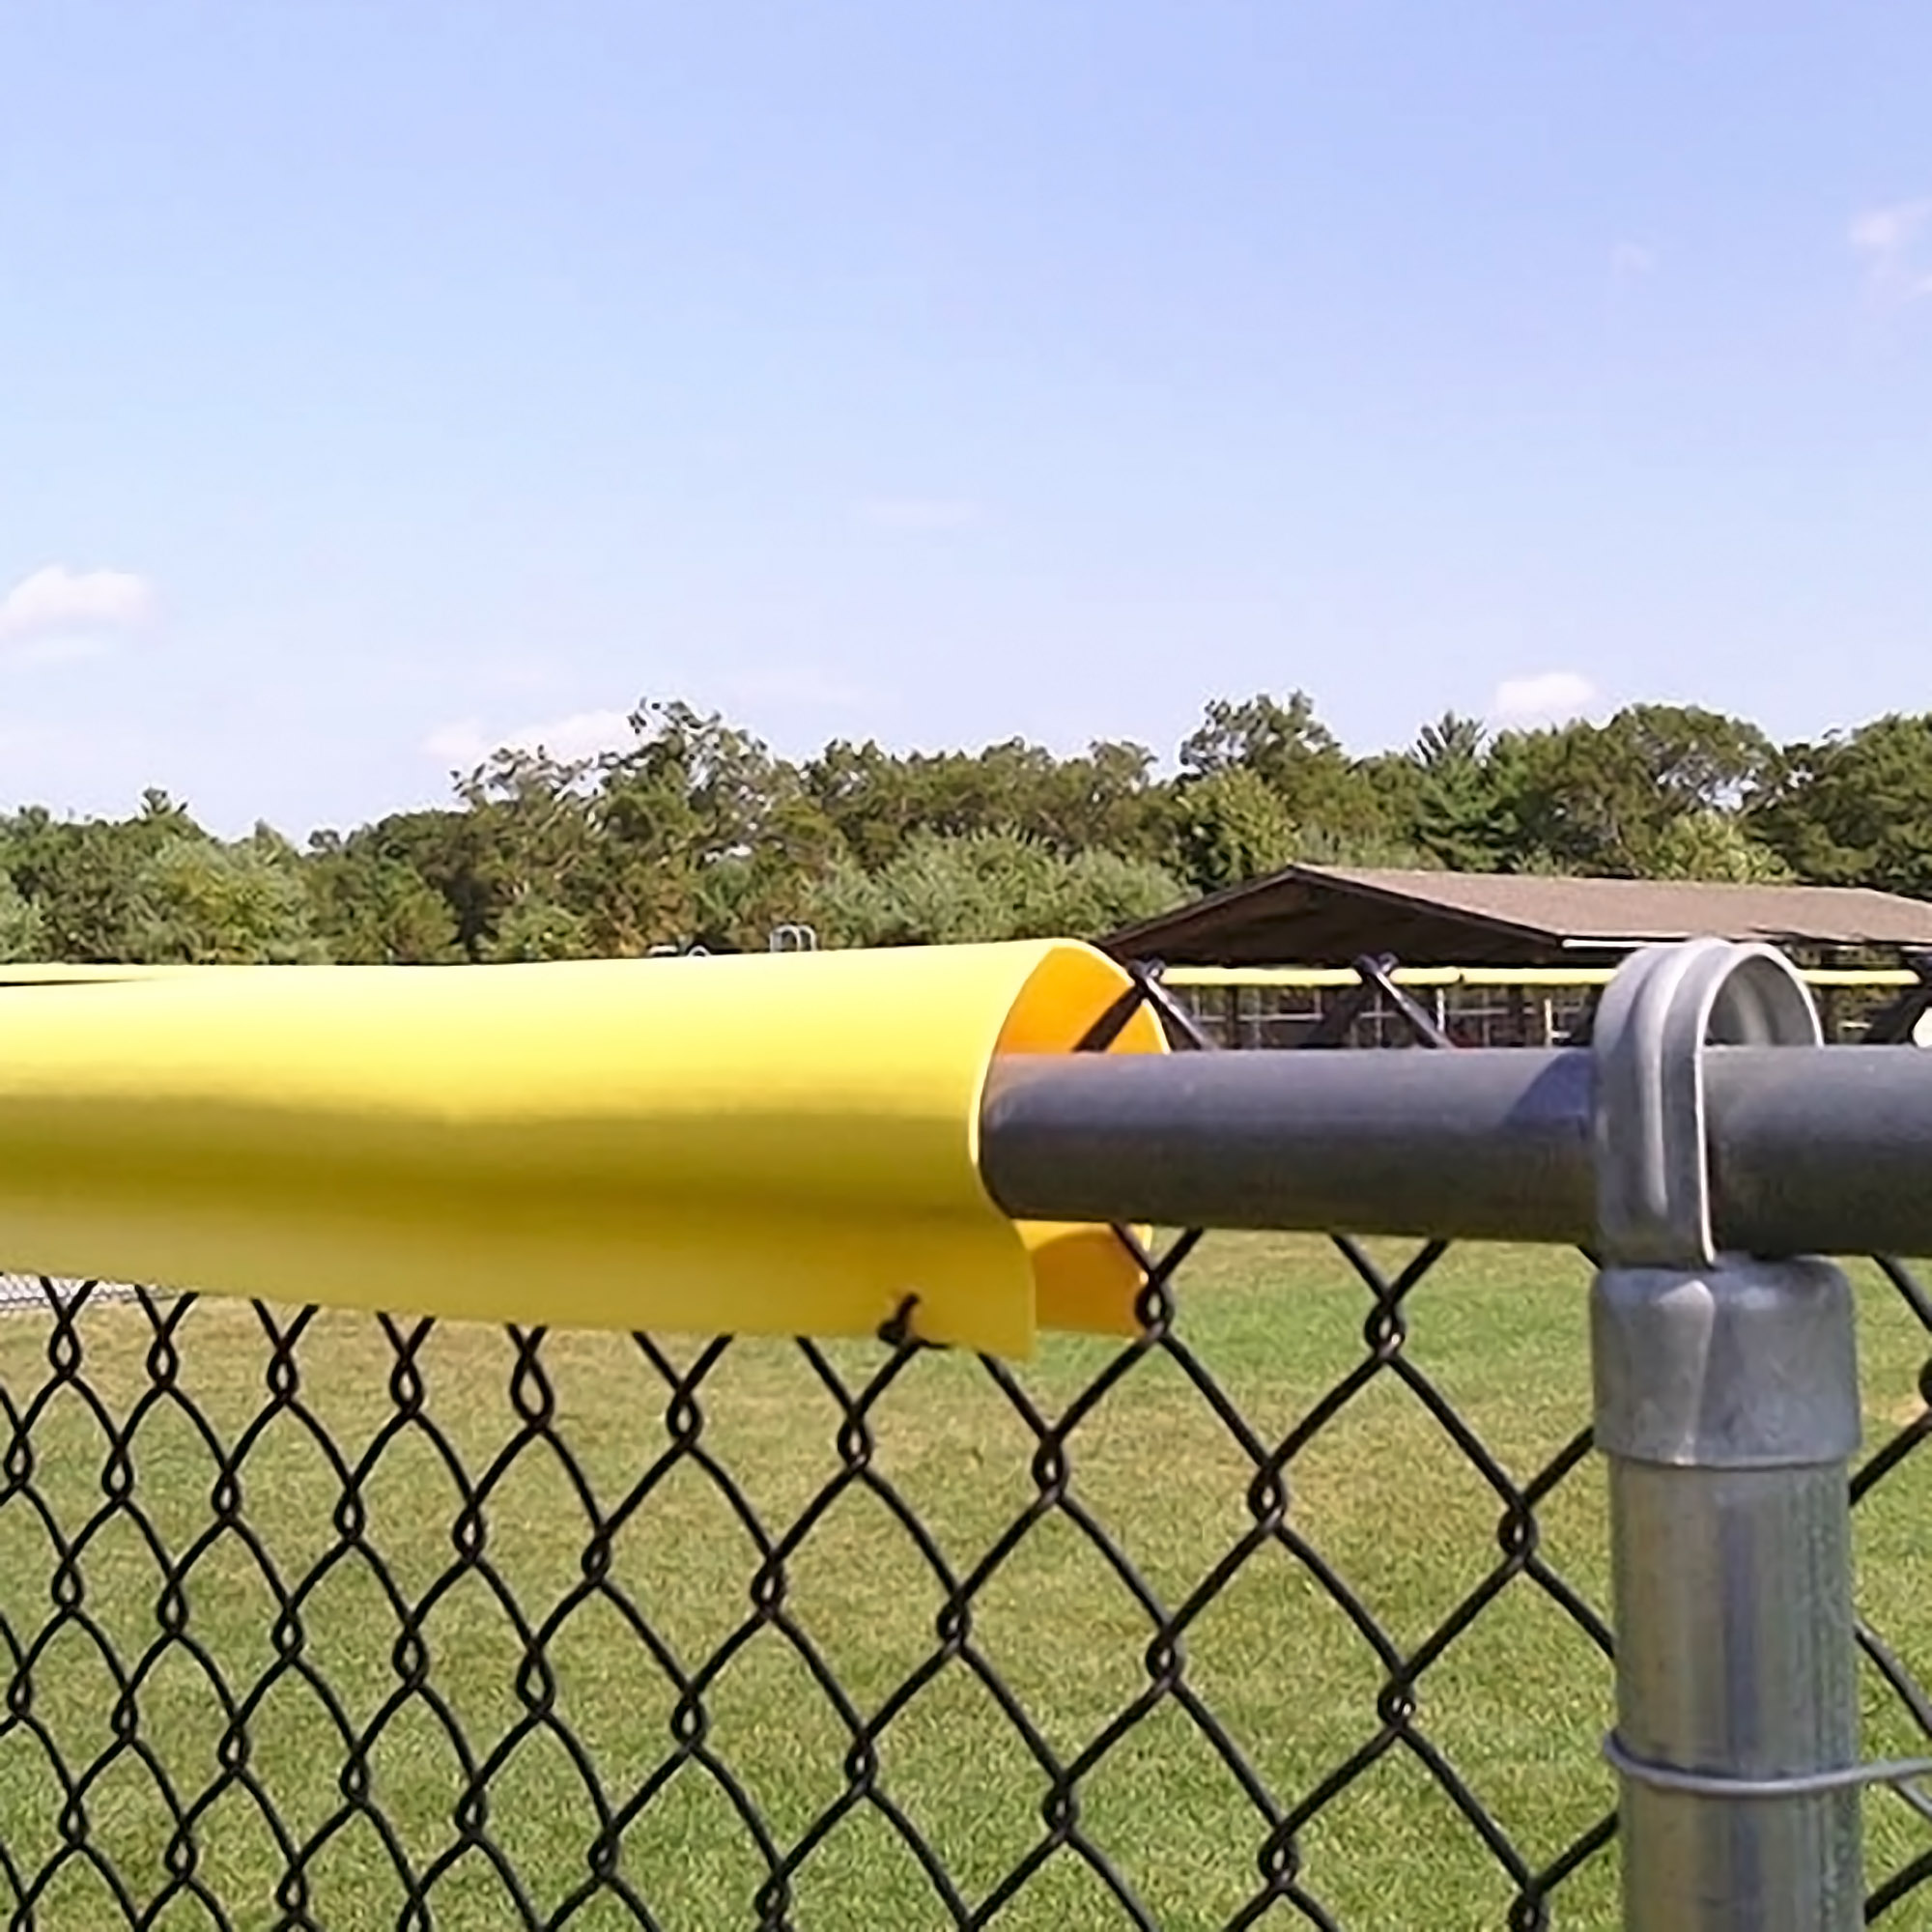  Safety Top Cap Baseball Outfield Fence Top Protection Cover